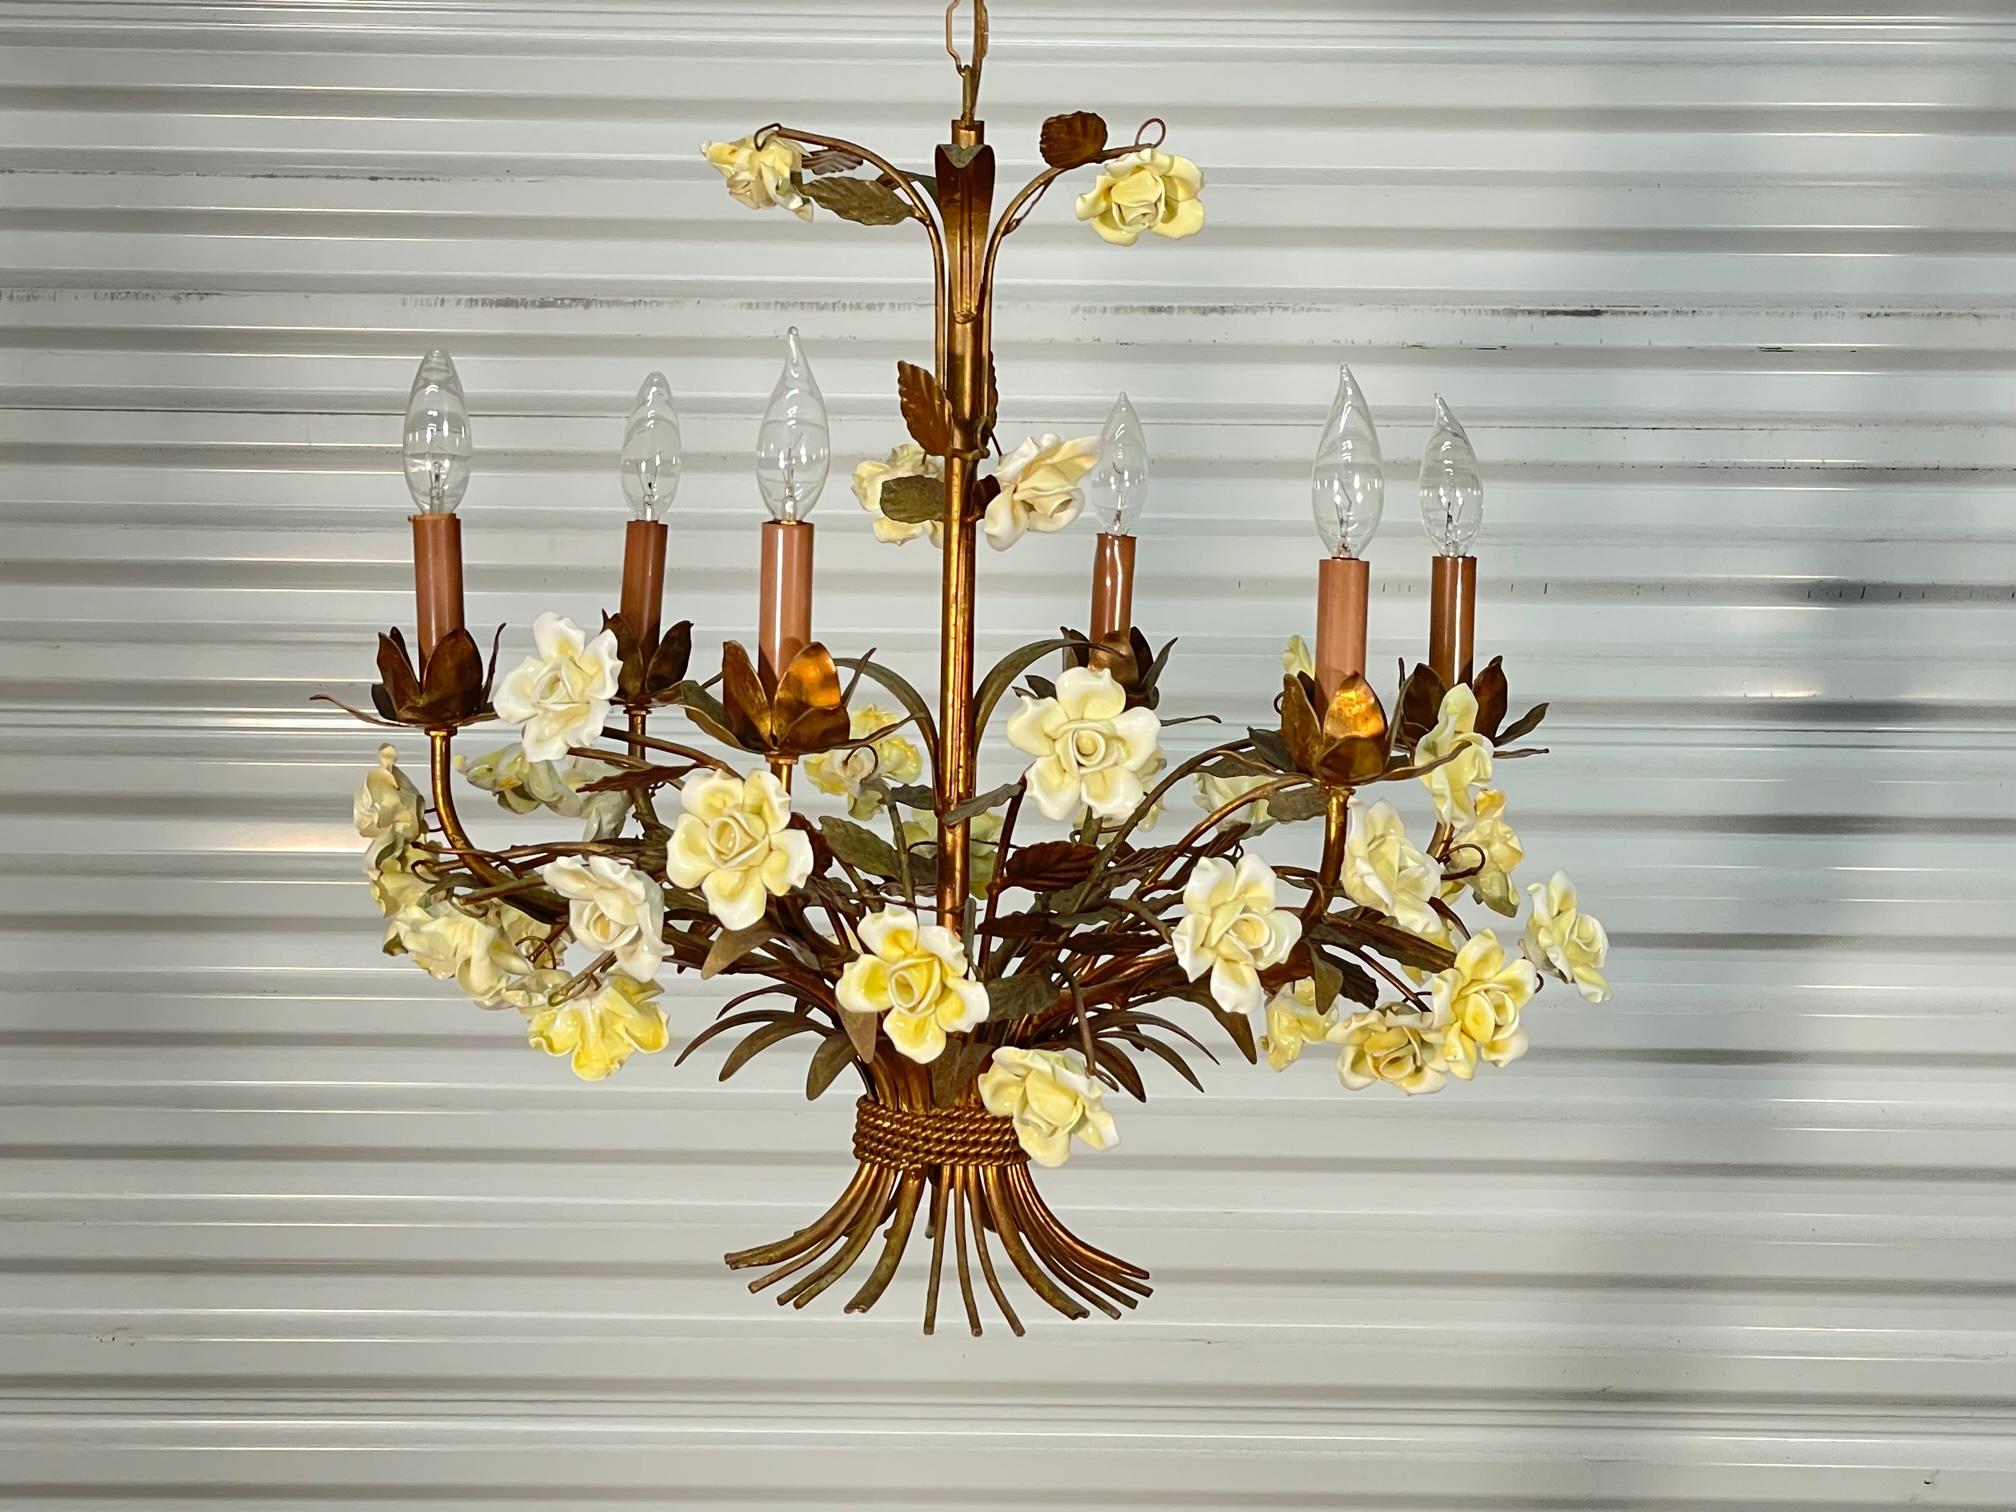 Tole metal chandelier features ceramic roses and original 